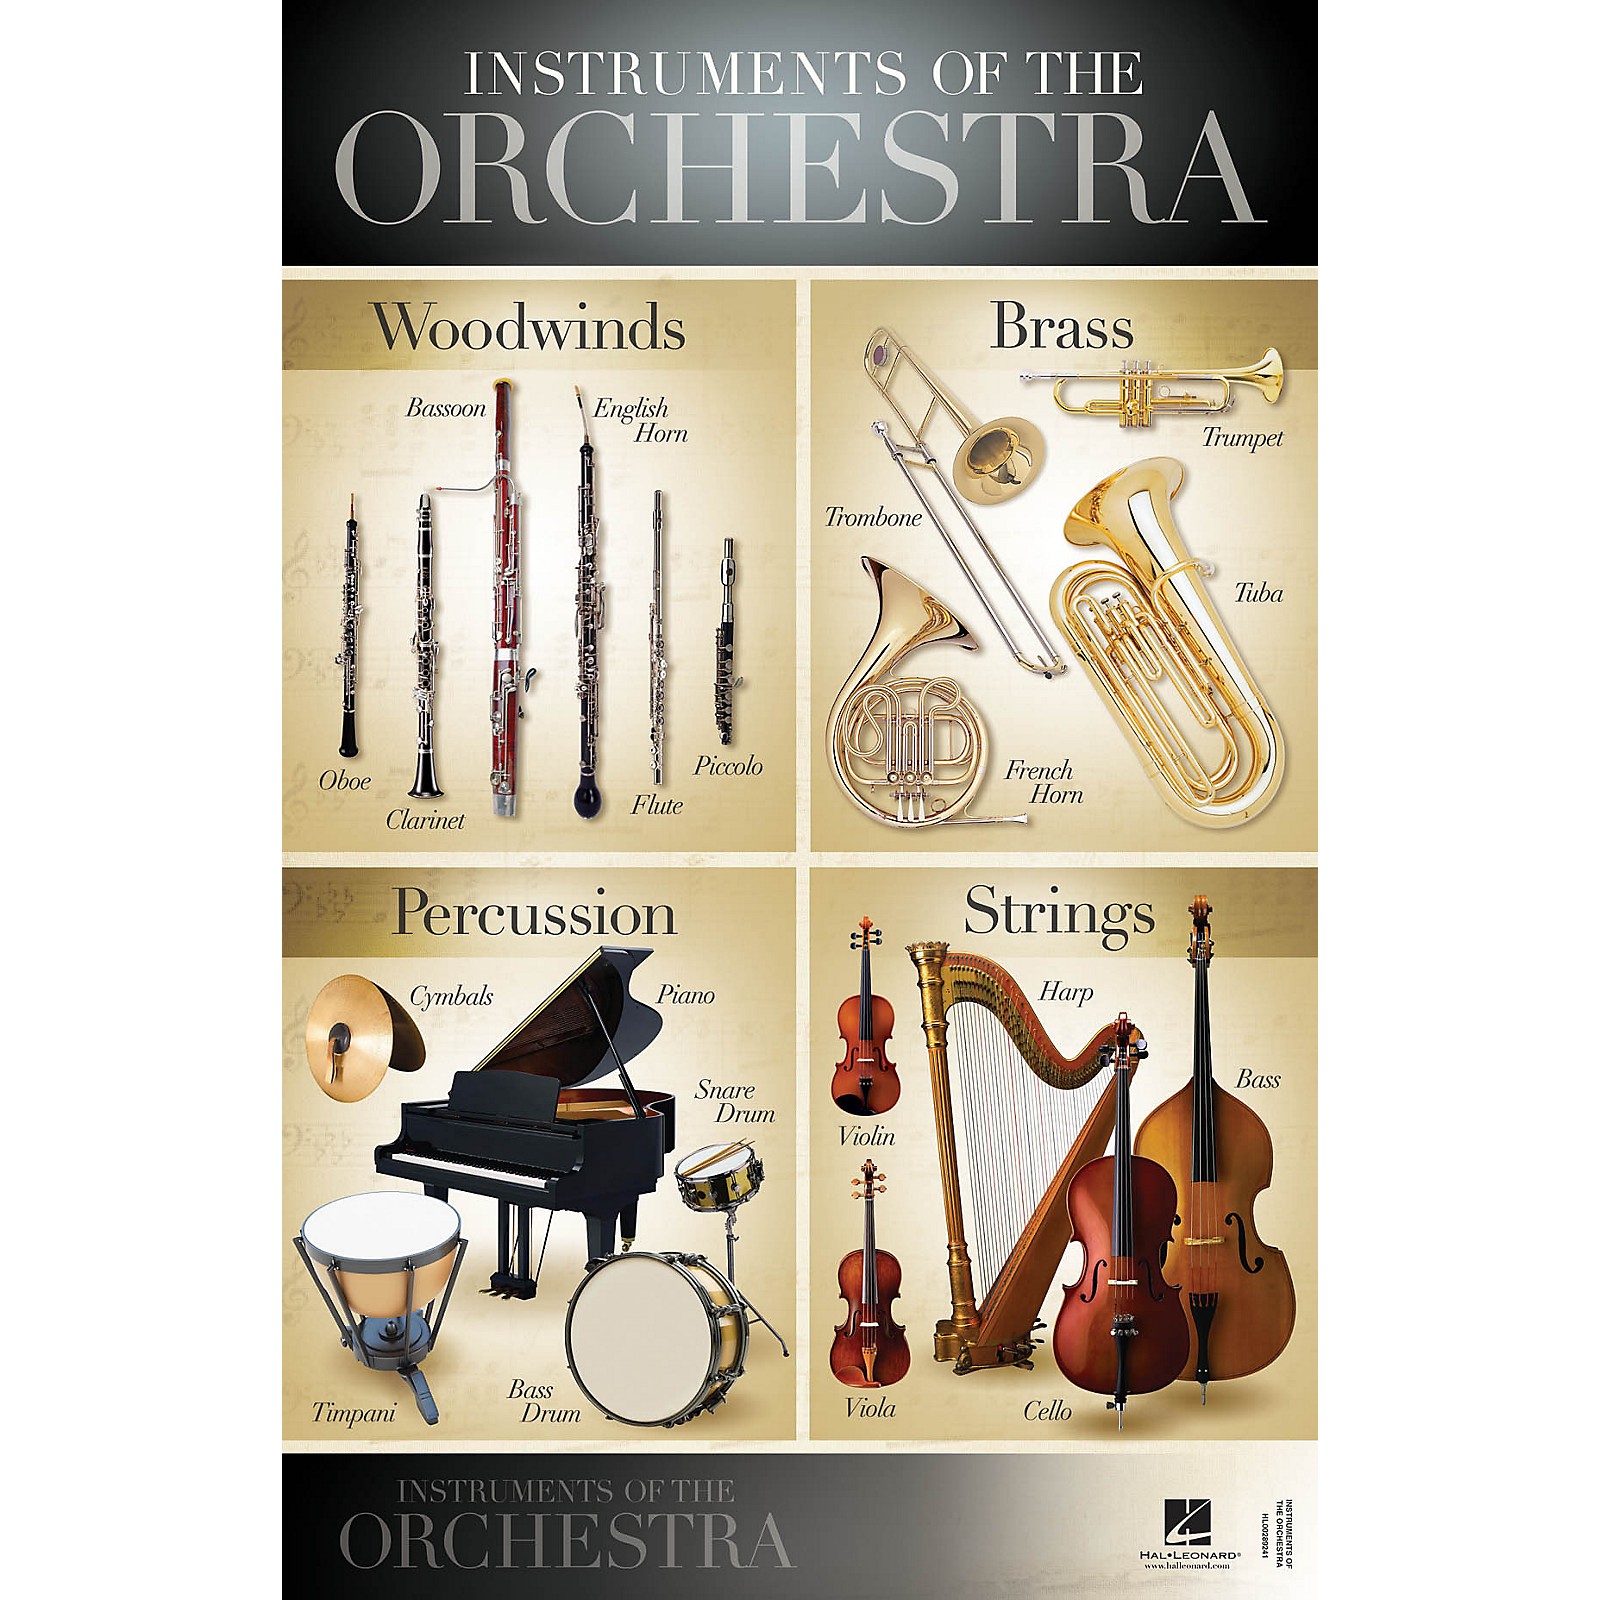 Woodwind instruments and Brass instruments